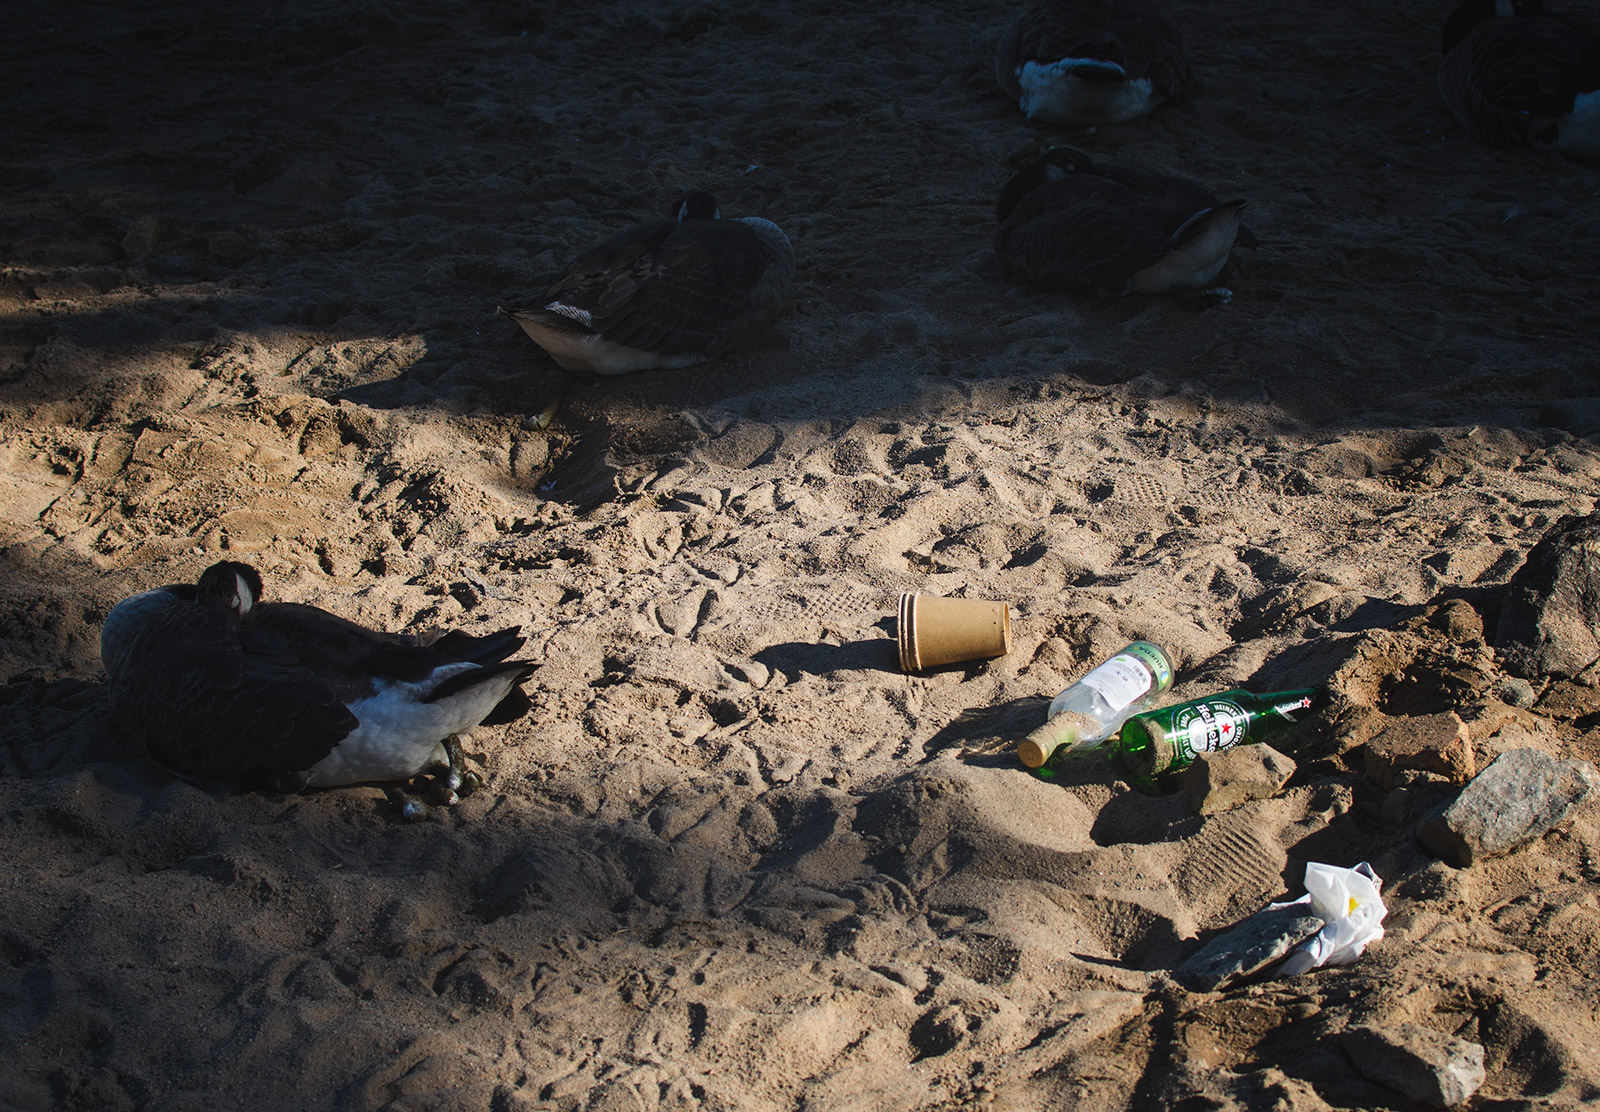 Litter and sleeping geese